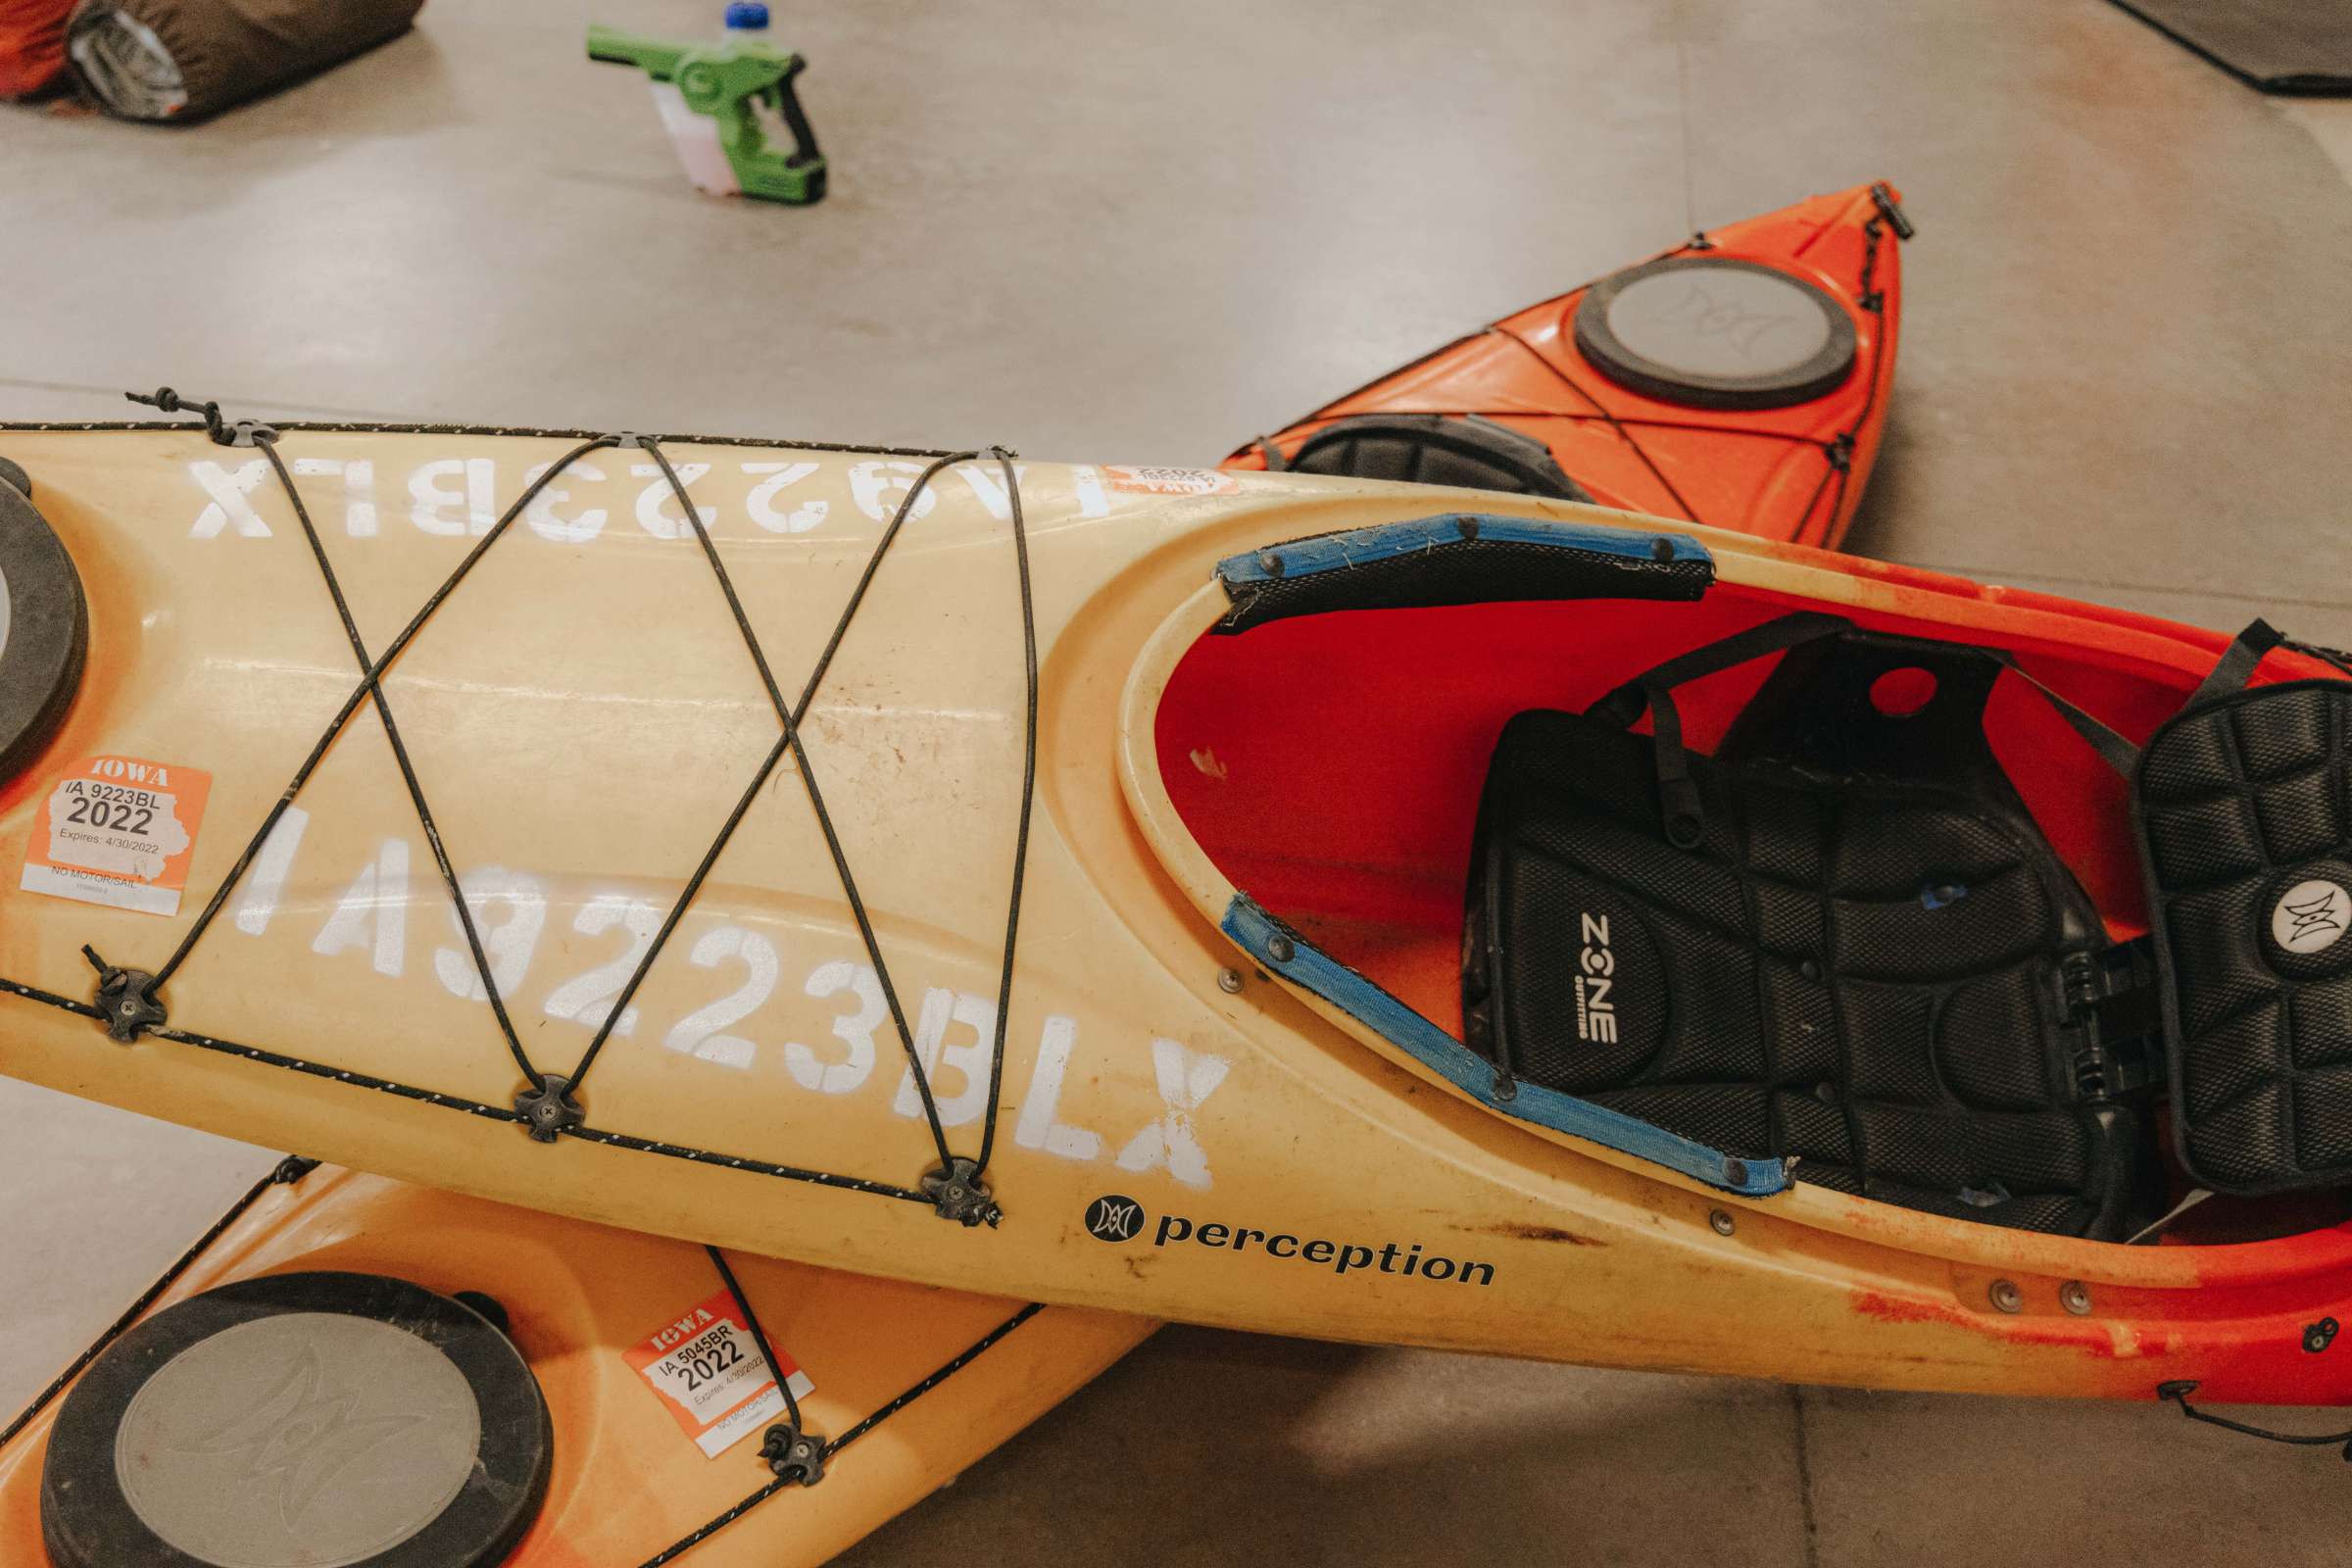 Picture of kayaks for equipment rental